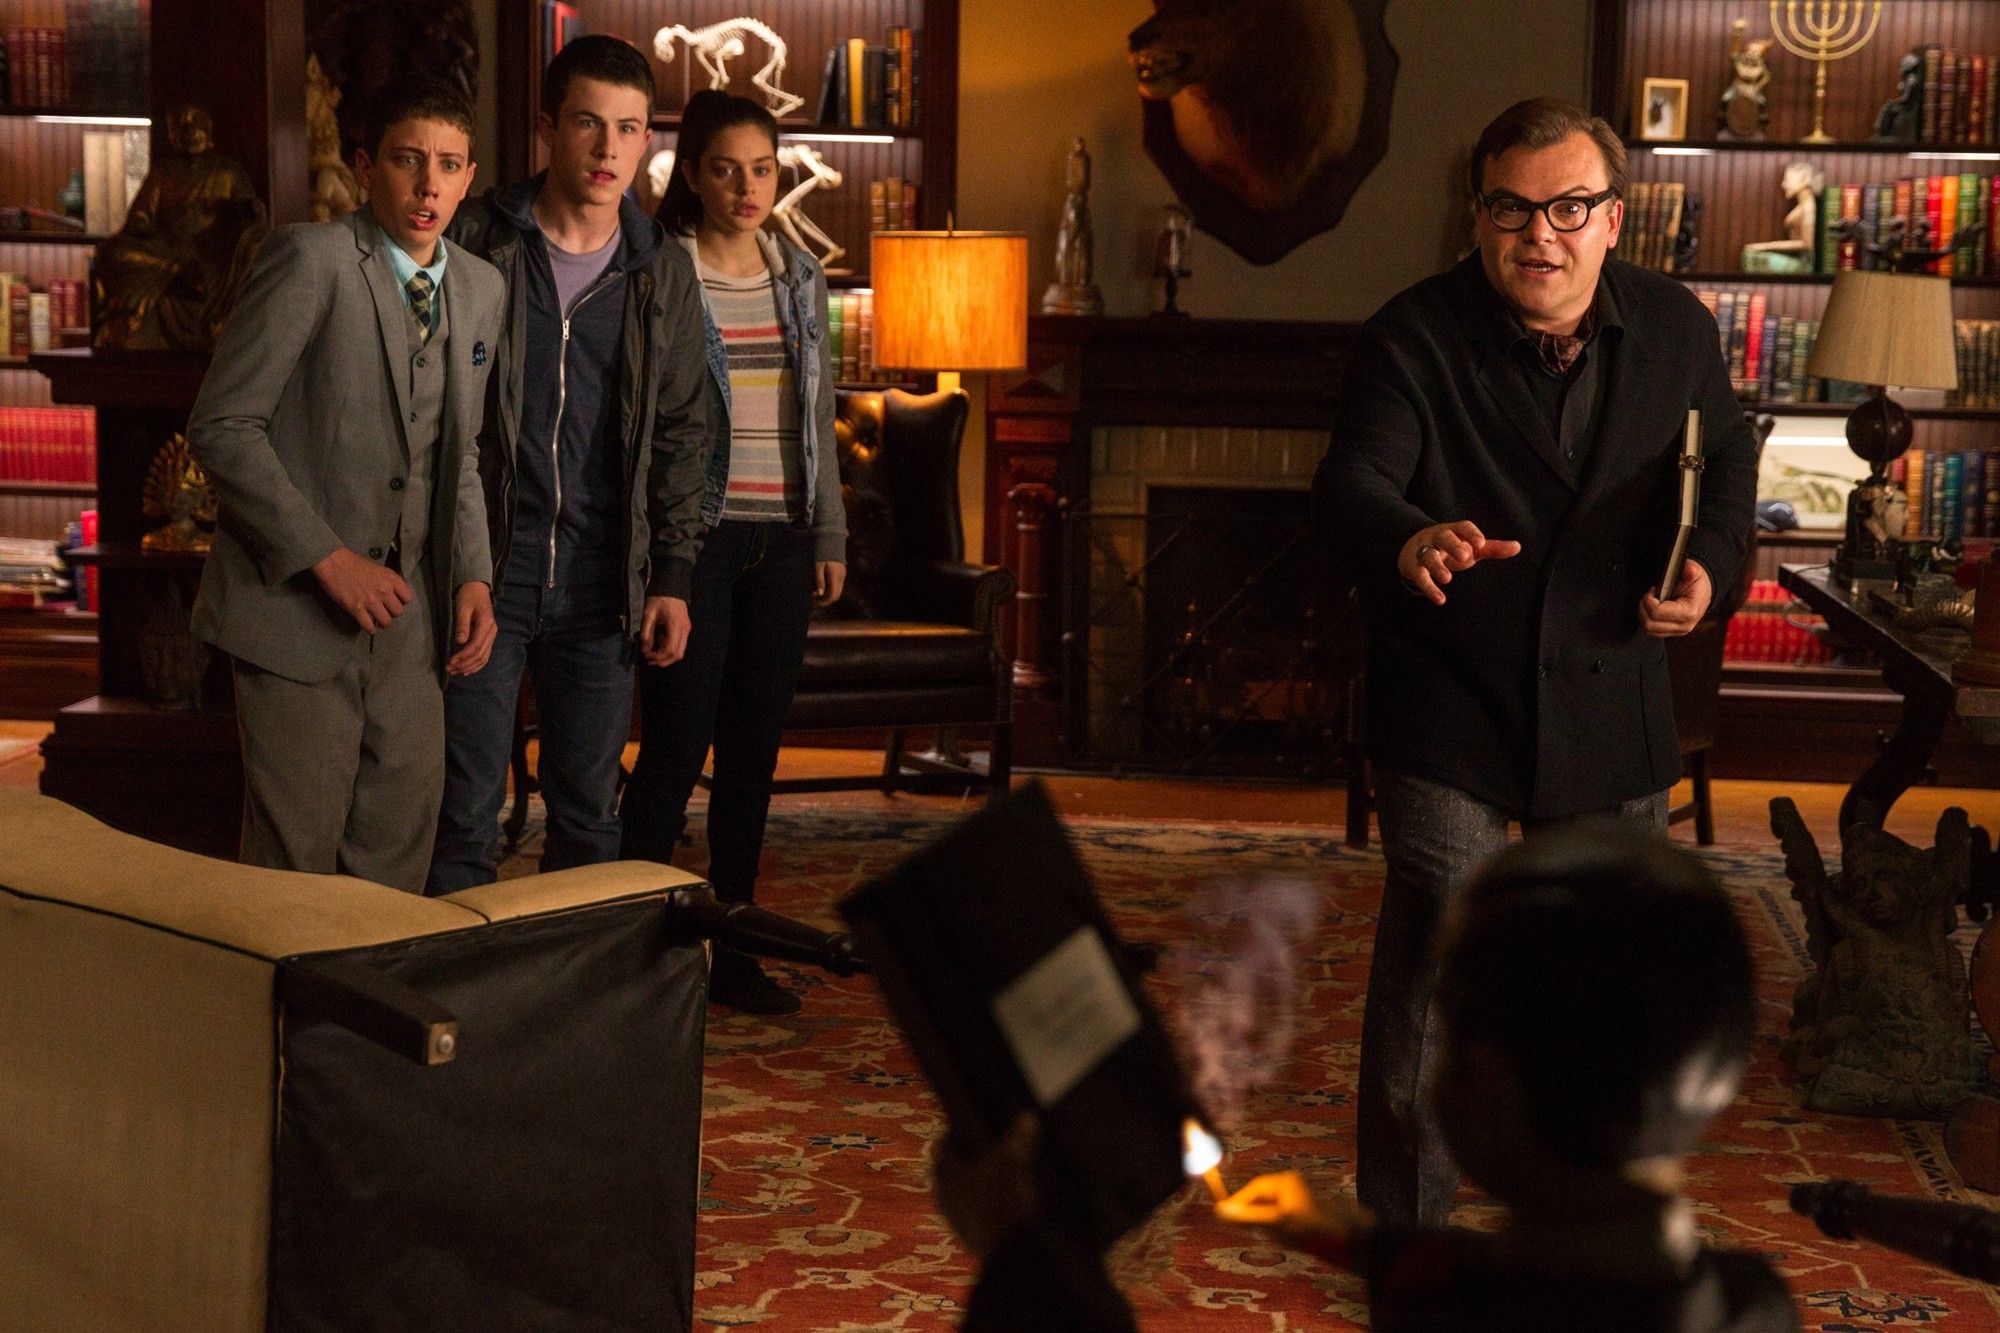 Ryan Lee, Dylan Minnette, Odeya Rush and Jack Black in Columbia Pictures' Goosebumps (2015)